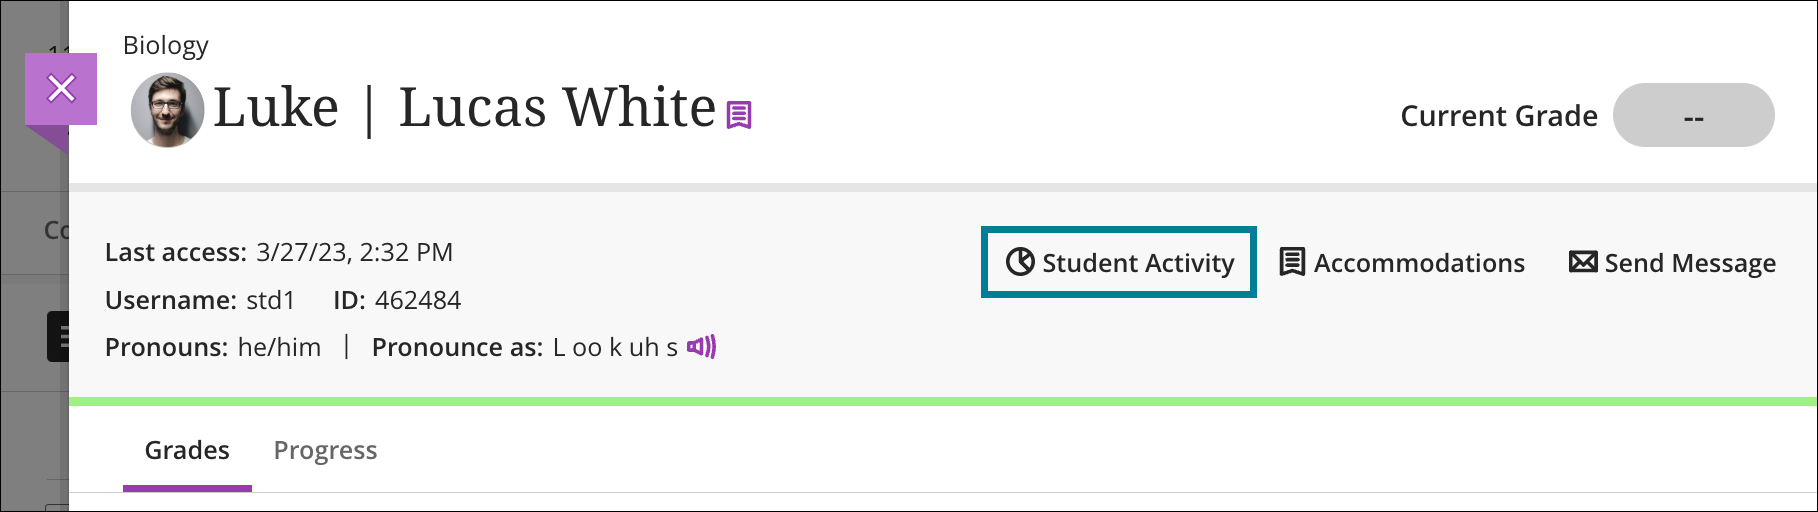 Image of the Student Overview header, with the Student Activity button outlined in blue